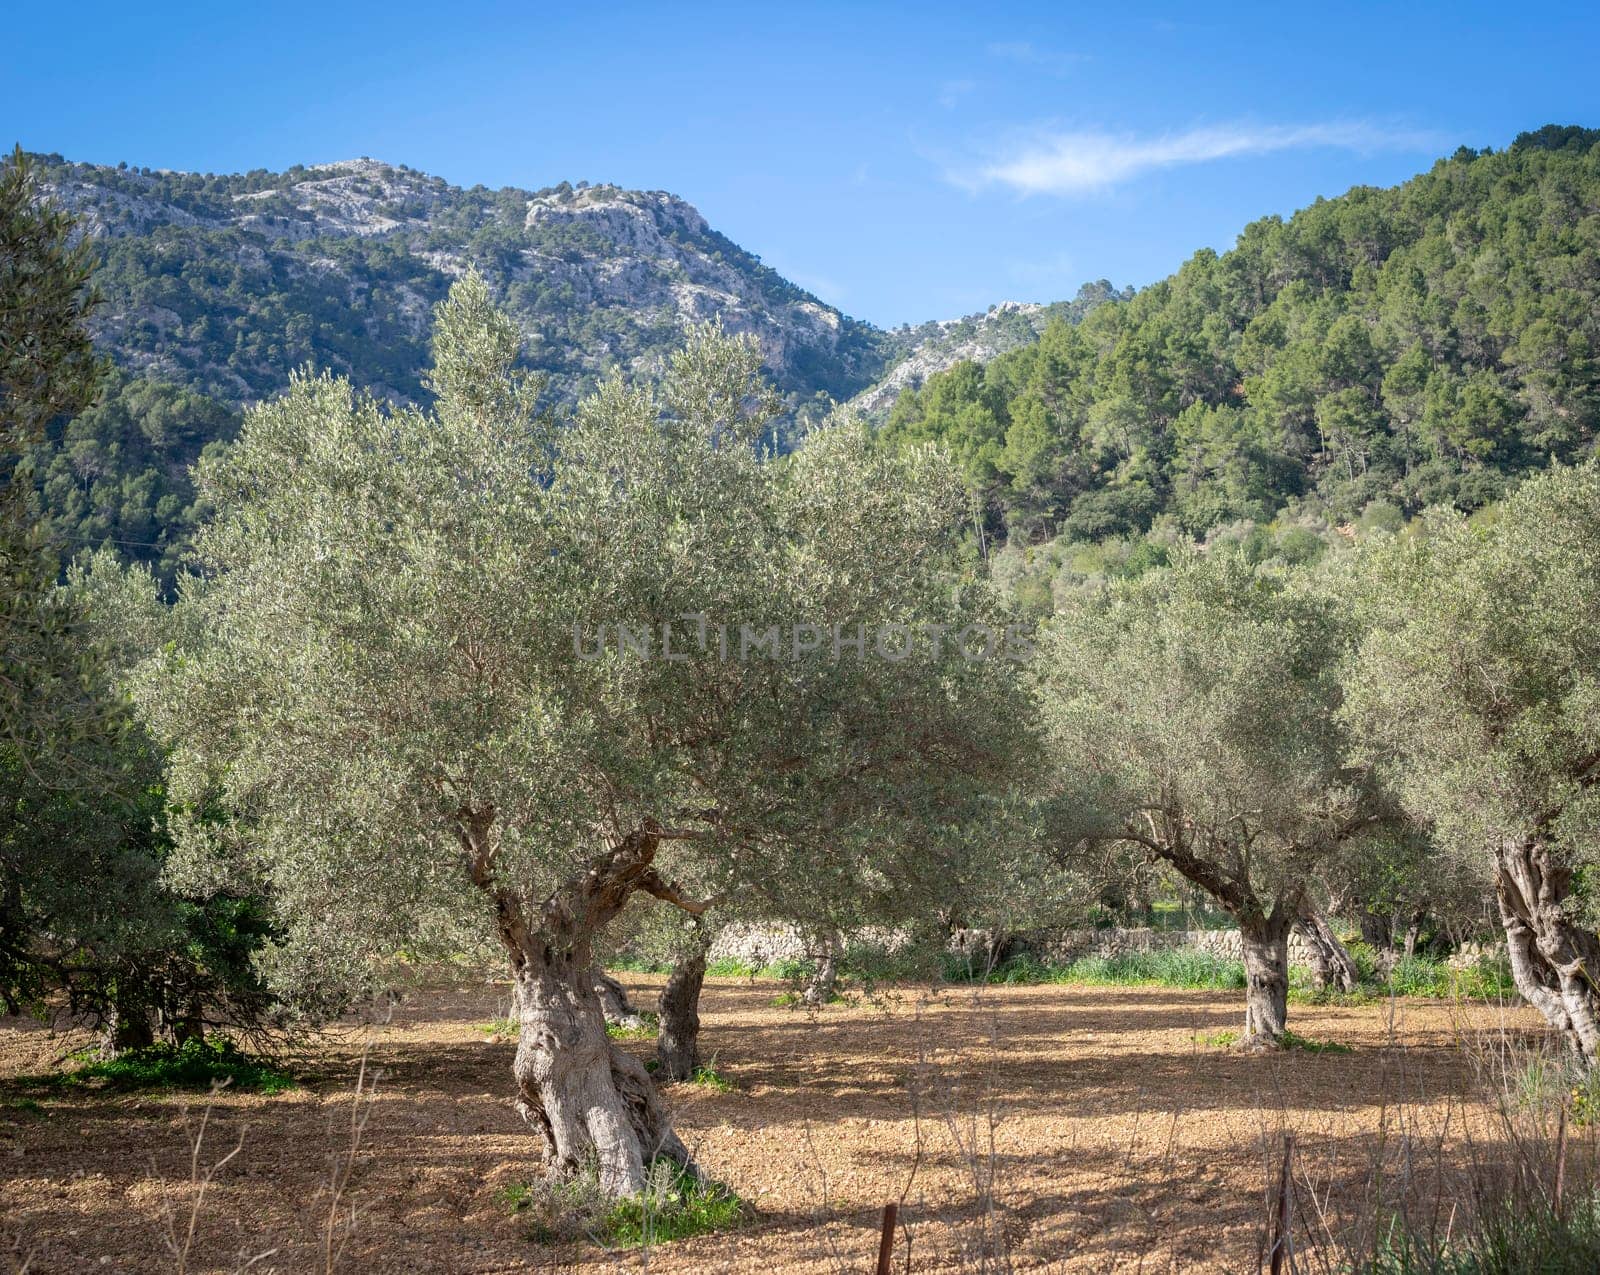 Timeless Serenity: Centuries-Old Olive Trees Nestled at the Foot of a Mountain by Juanjo39